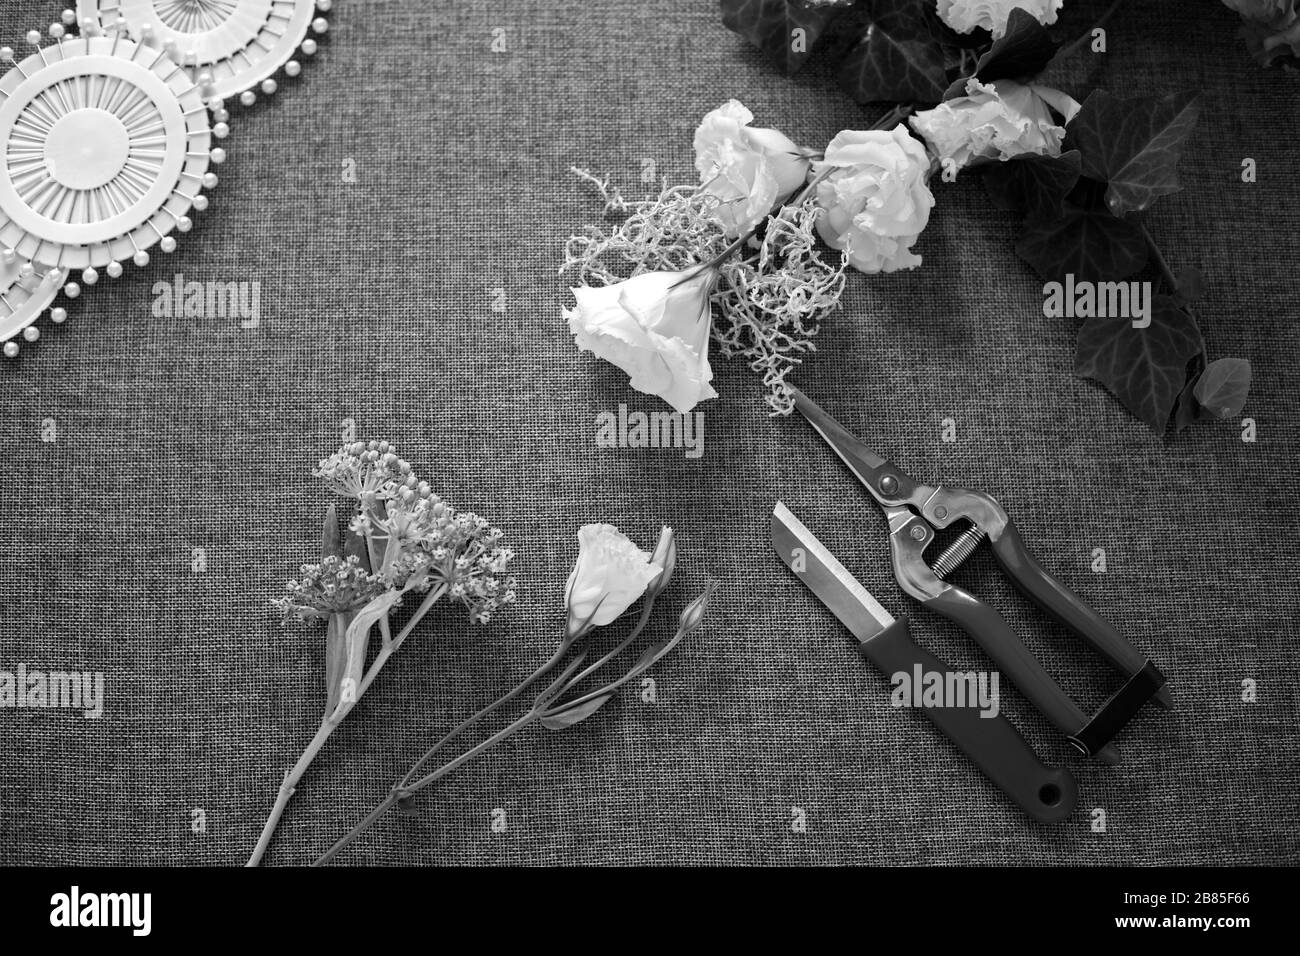 Florist workplace. Tools and accessories. Flowers, pruner, knife, pins Stock Photo